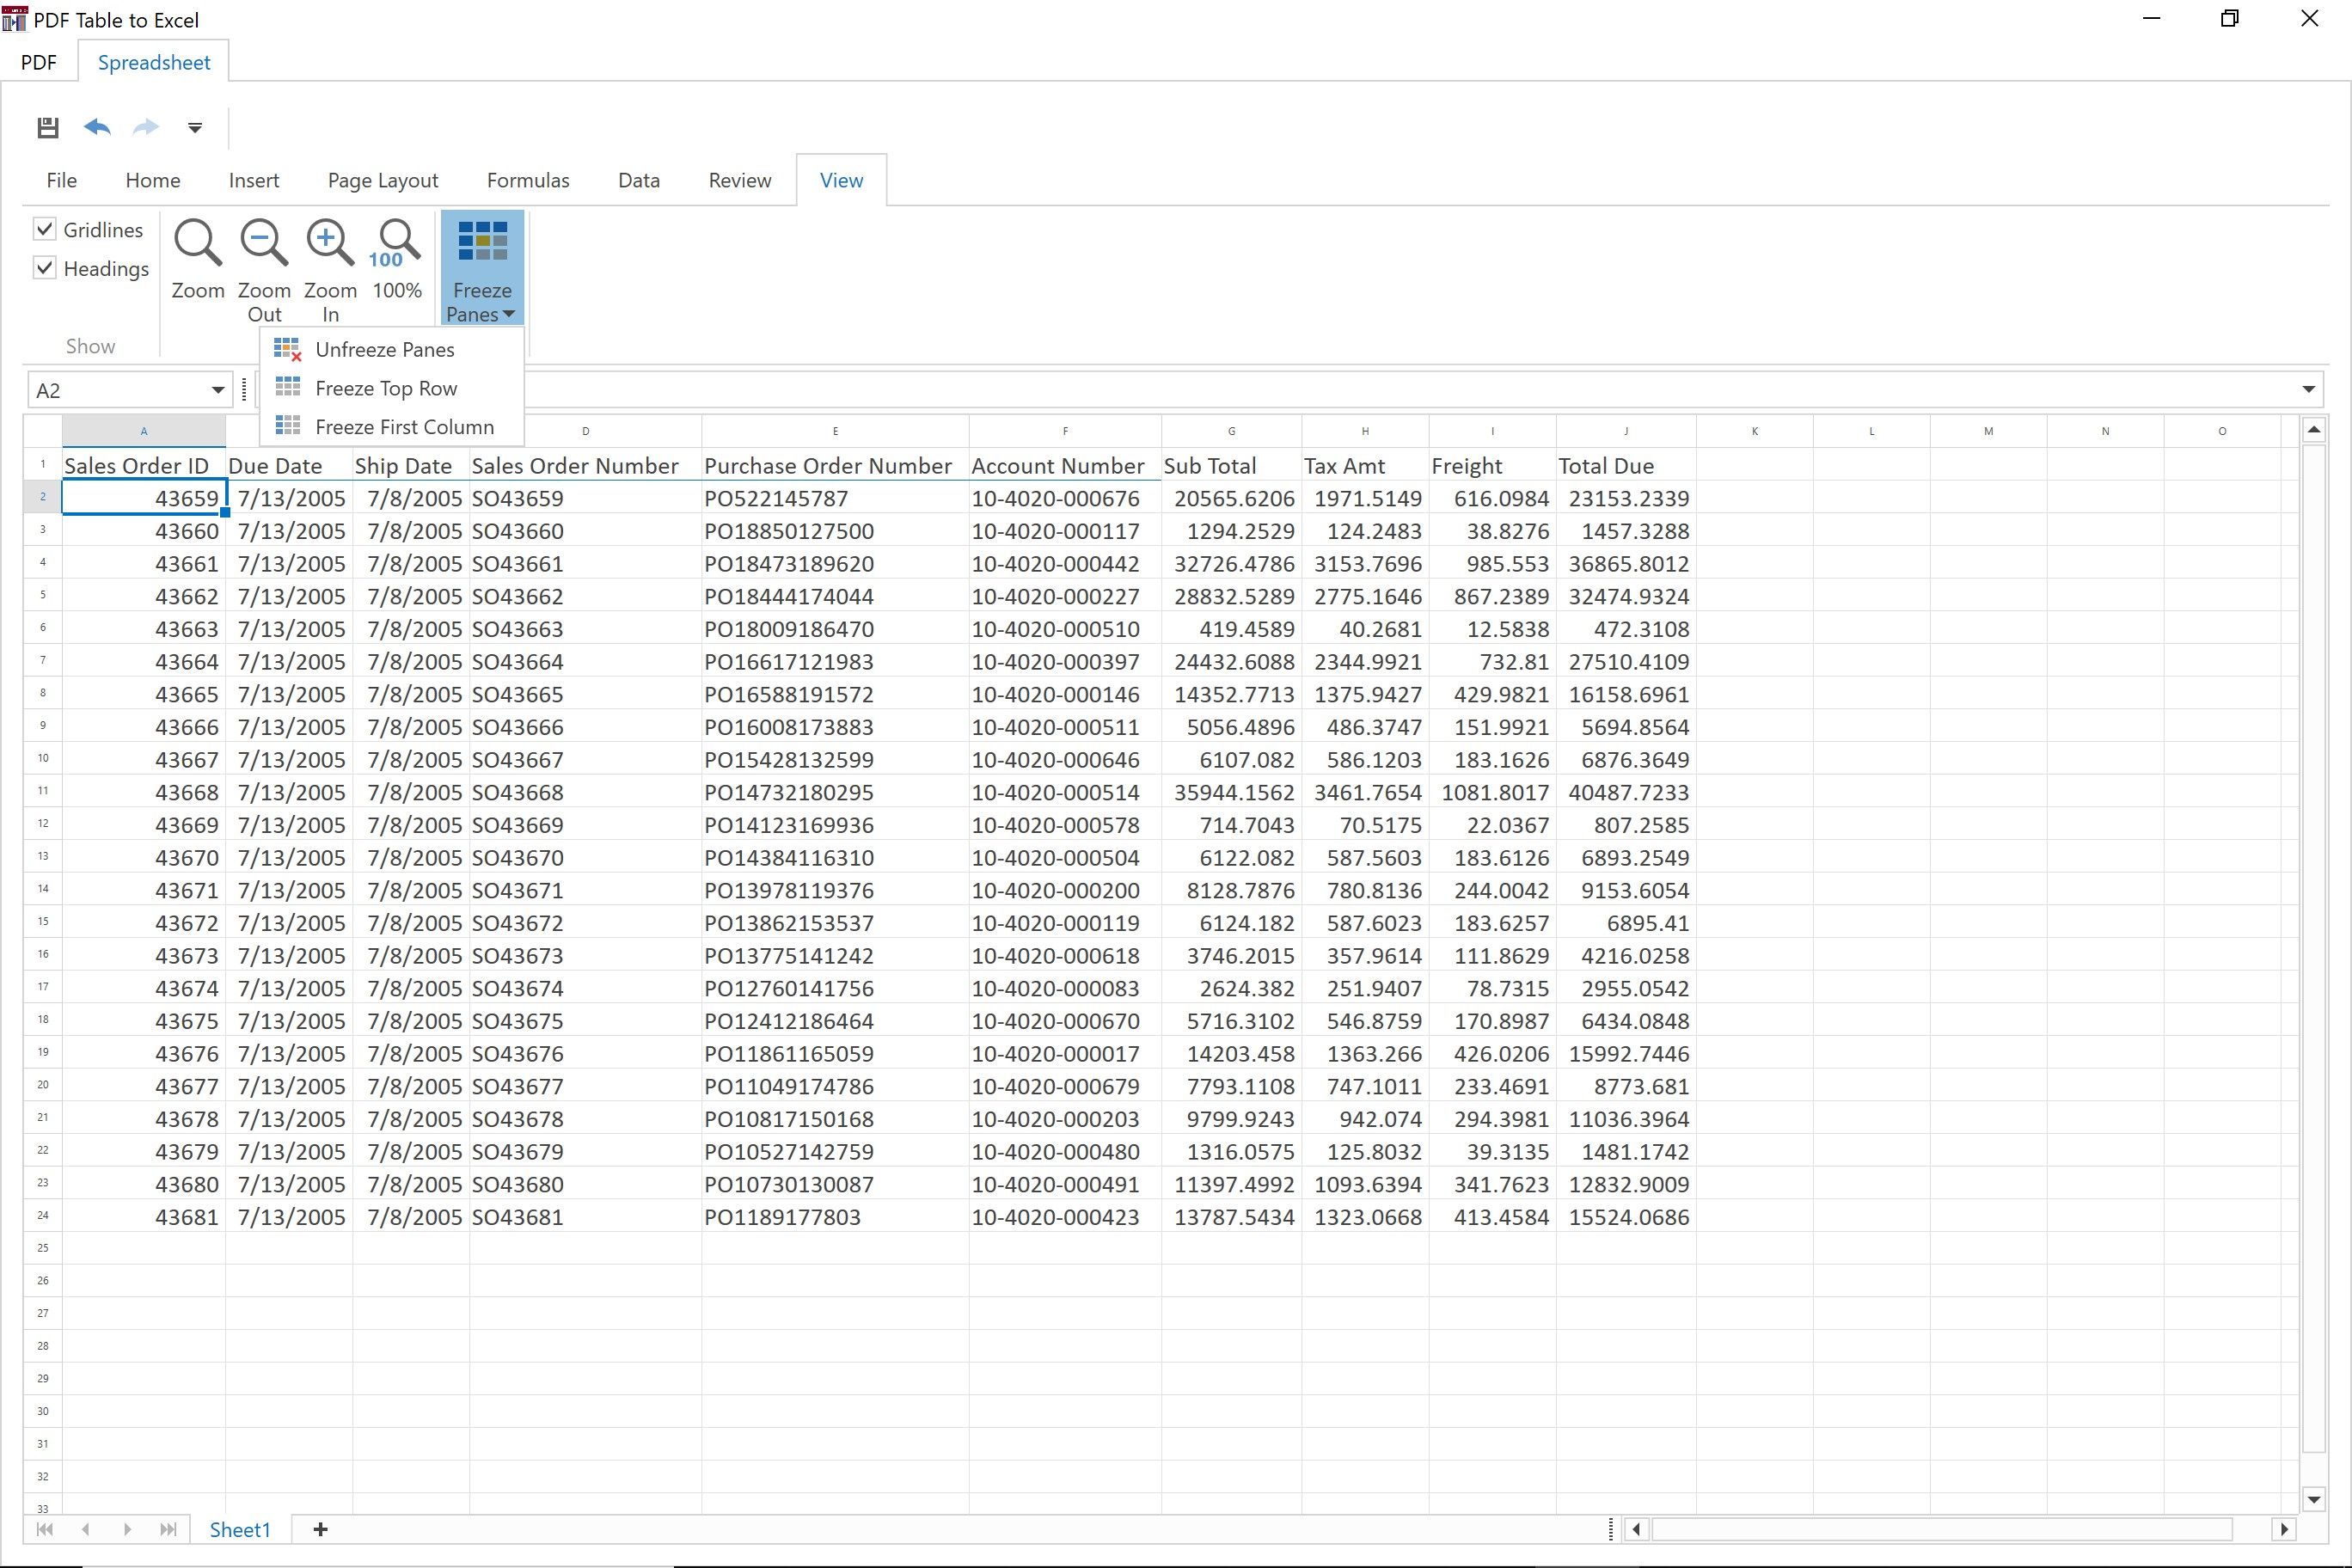 The data after it has been transferred to the spreadsheet. Header row is frozen for future transfers.